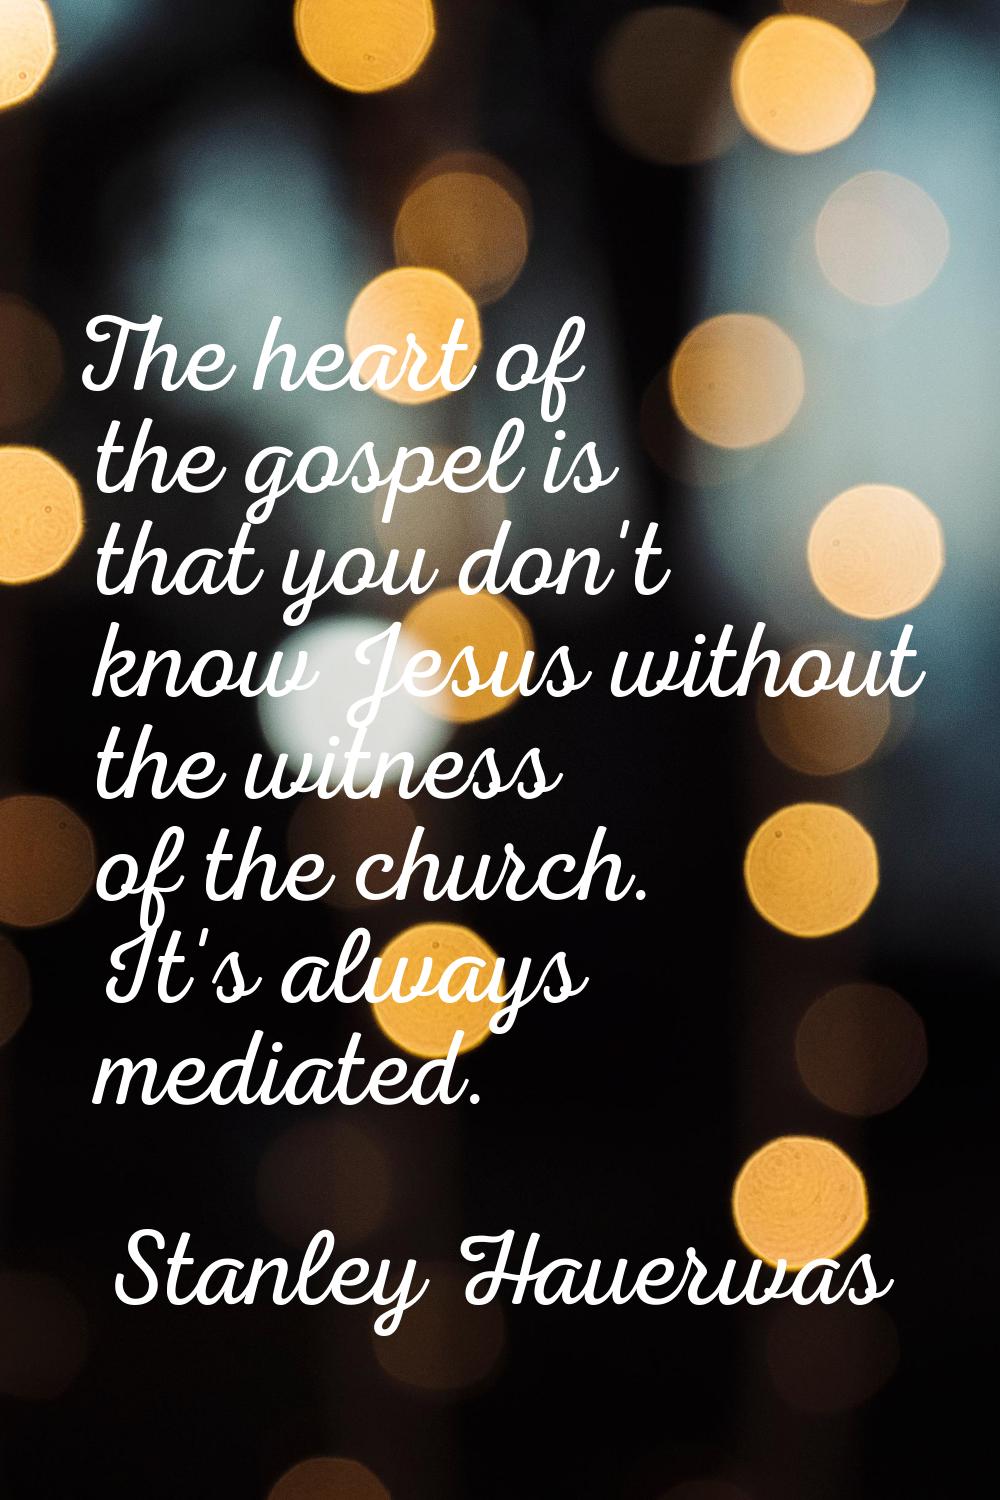 The heart of the gospel is that you don't know Jesus without the witness of the church. It's always